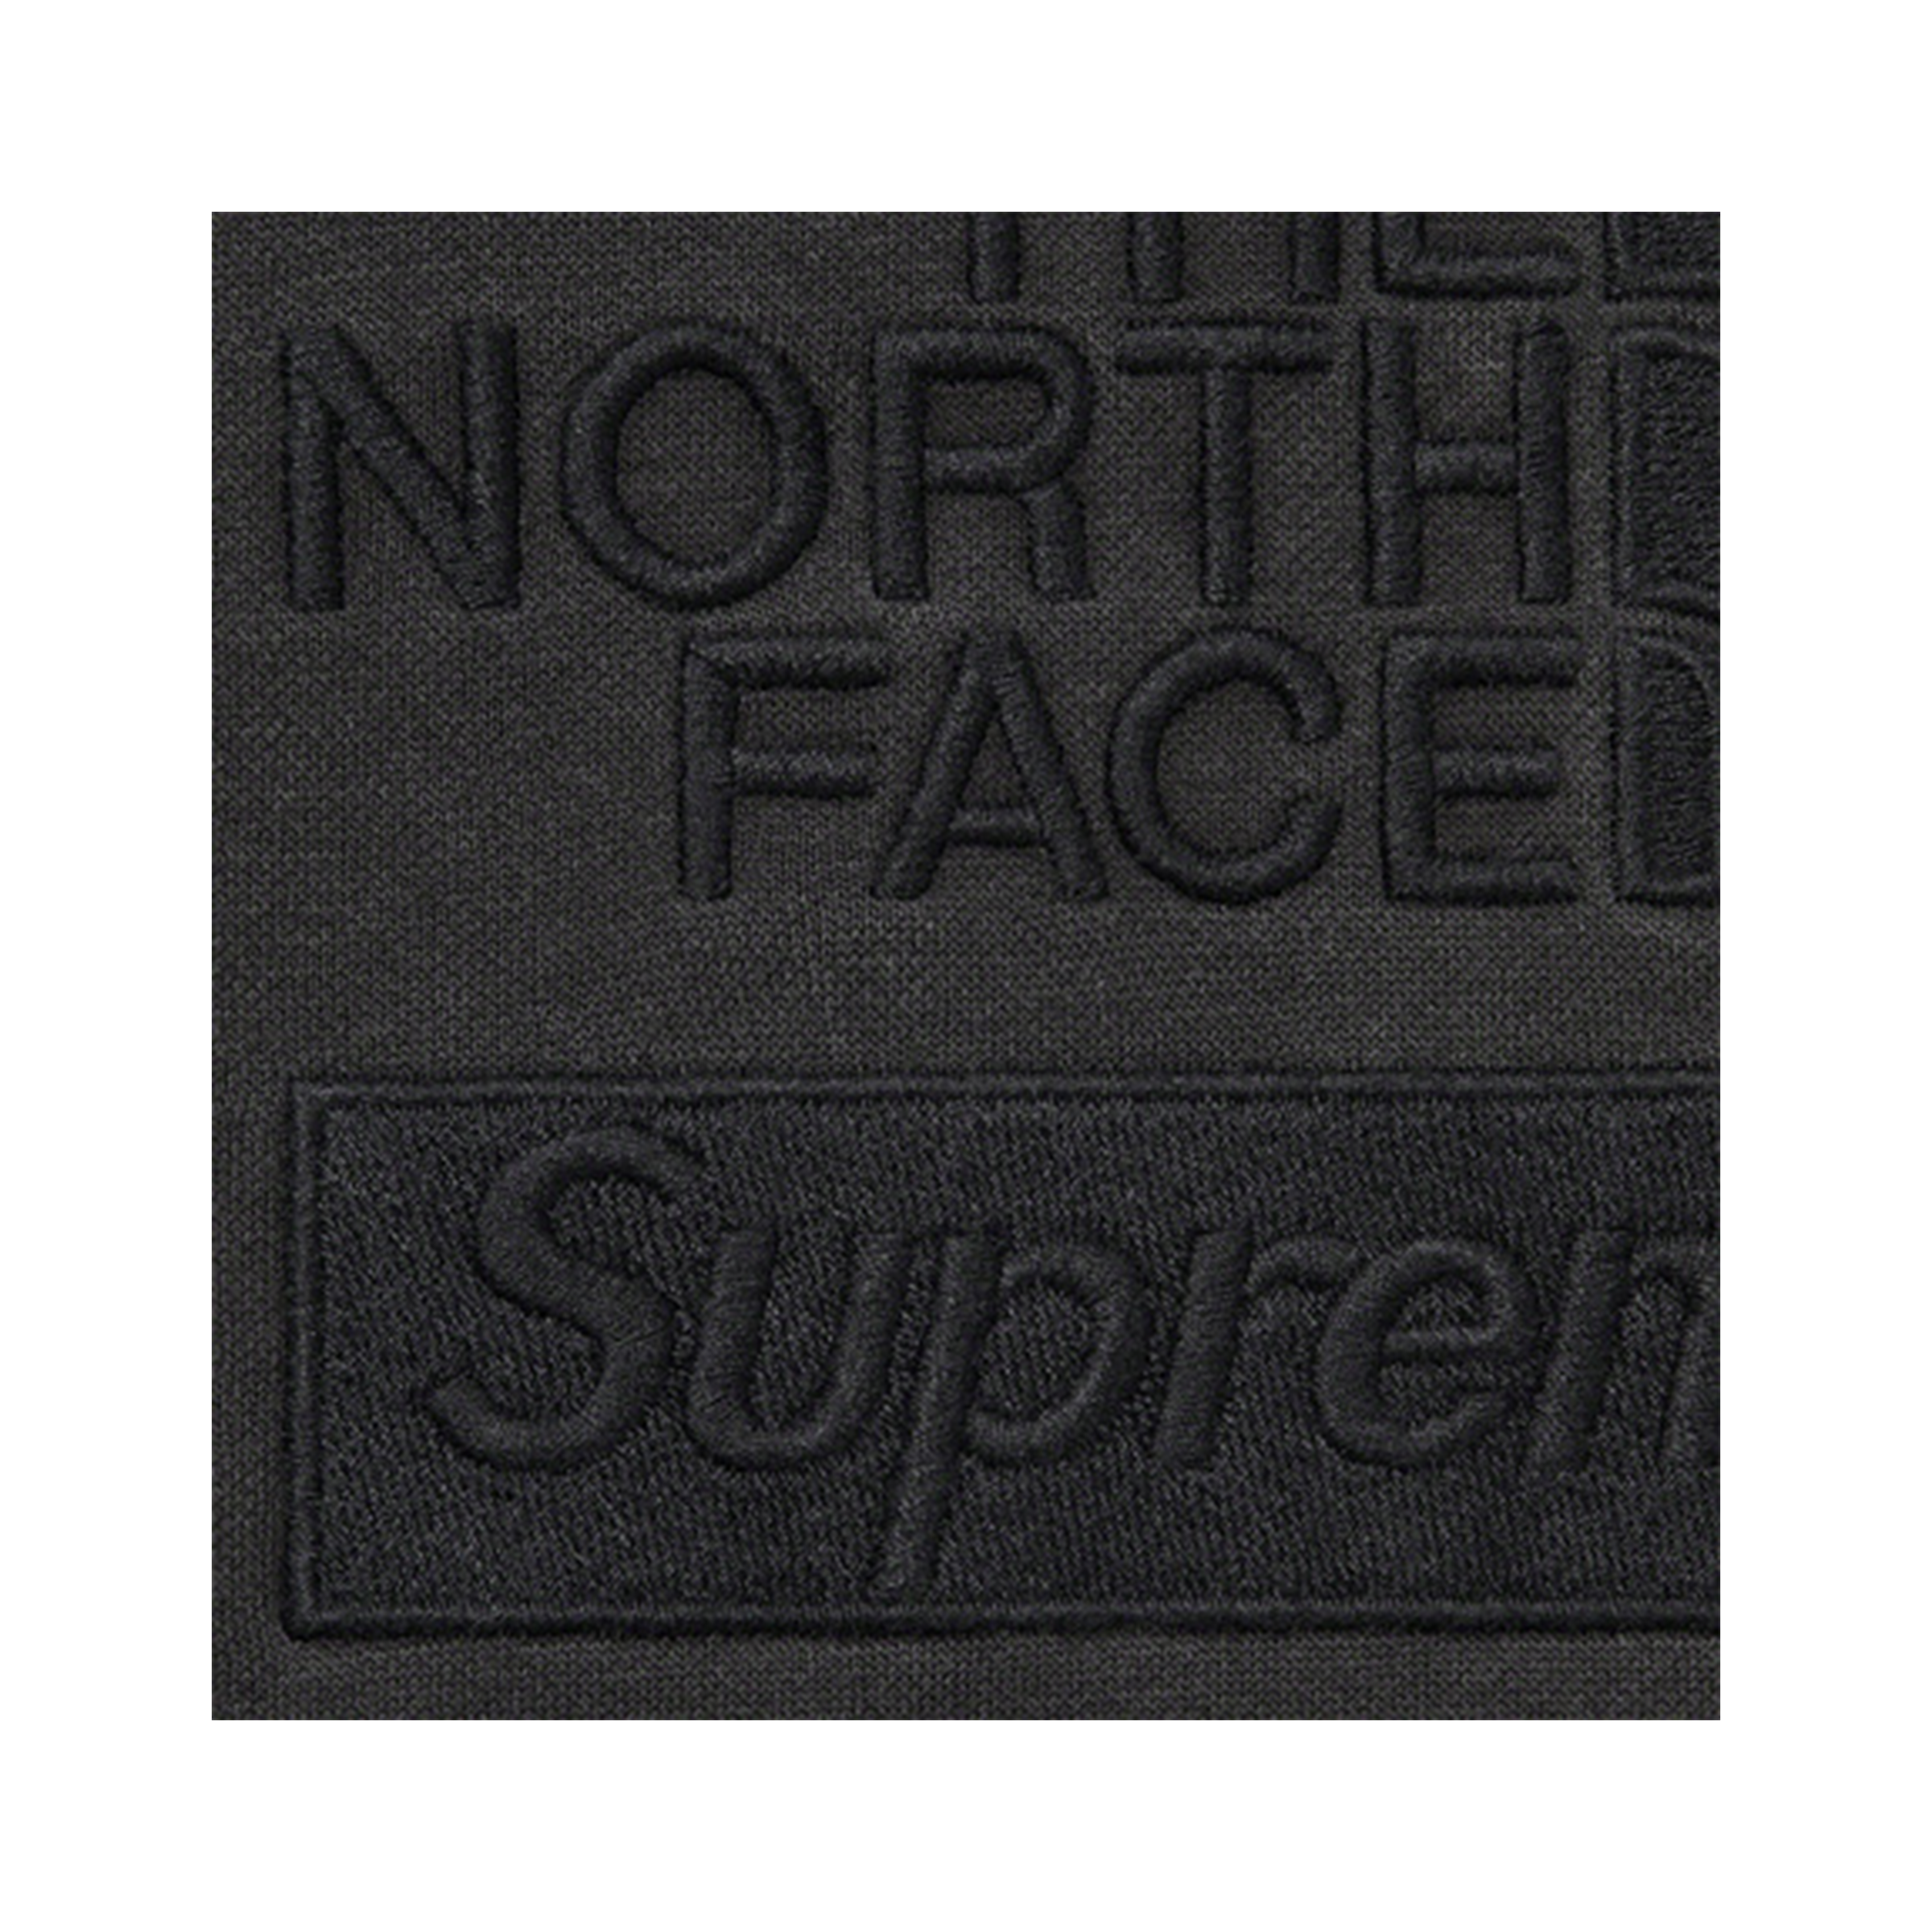 Supreme x The North Face - Hooded Sweatshirt